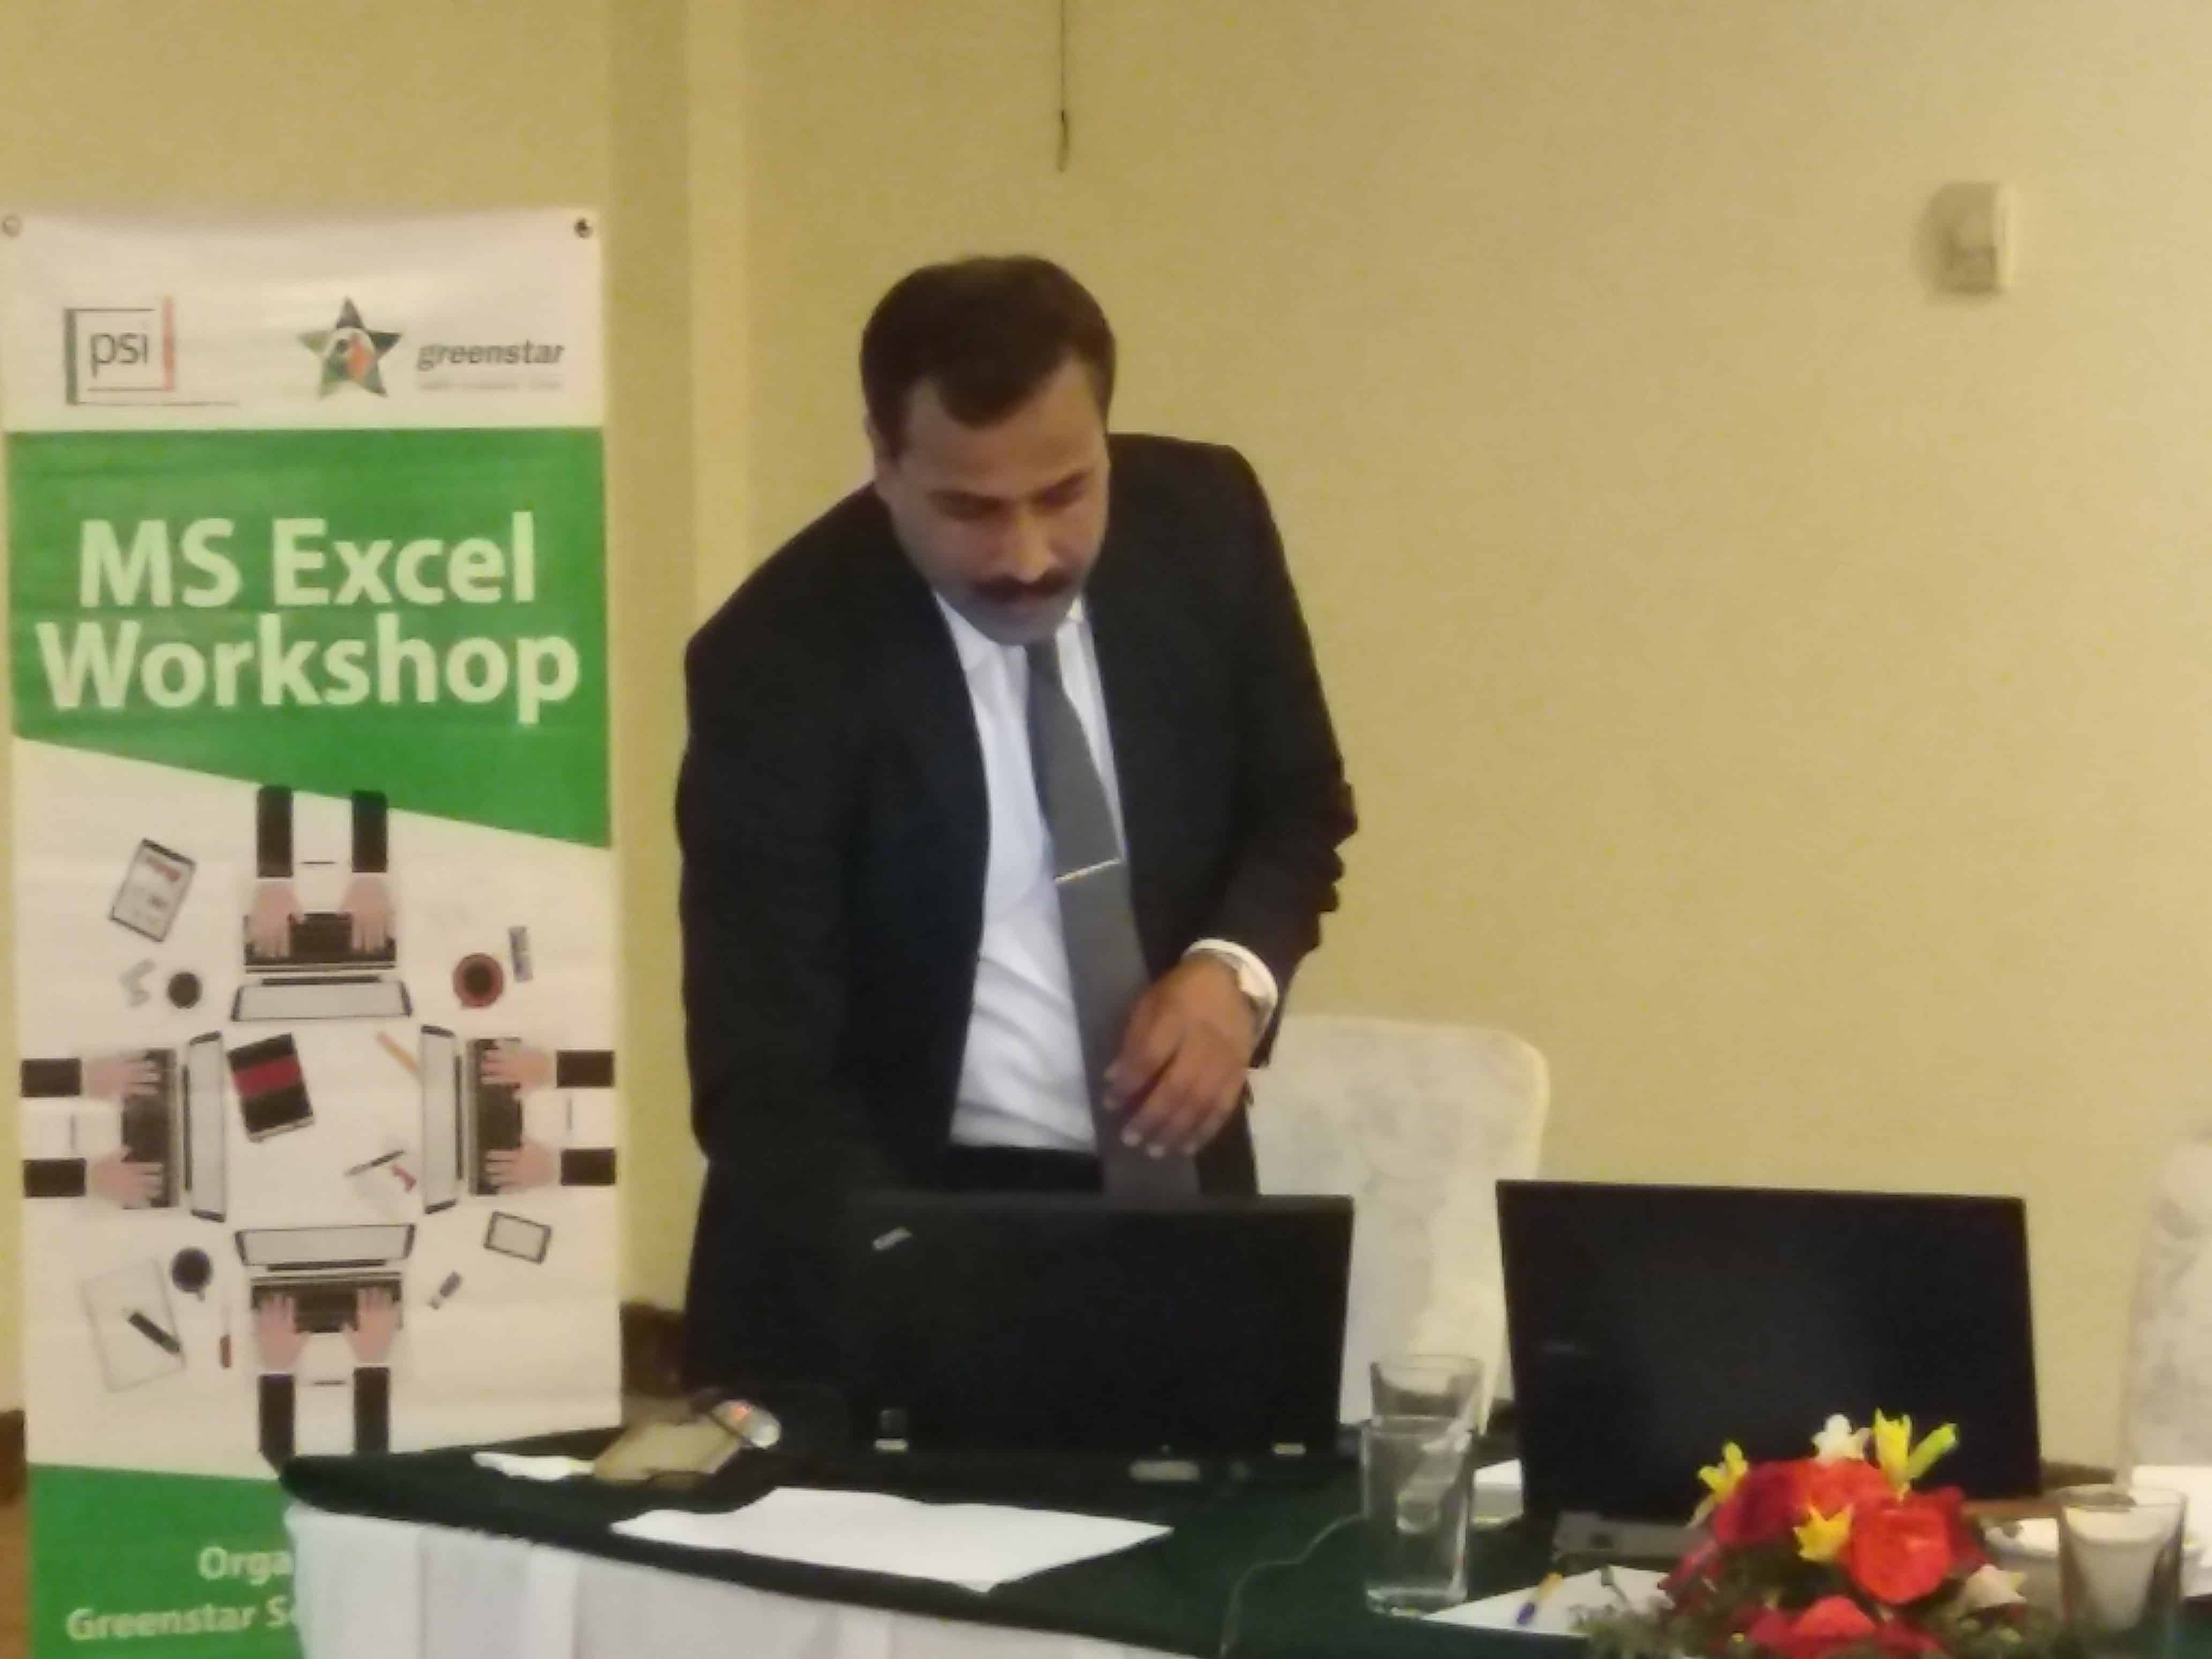 Excel with Green Star at Islamabad